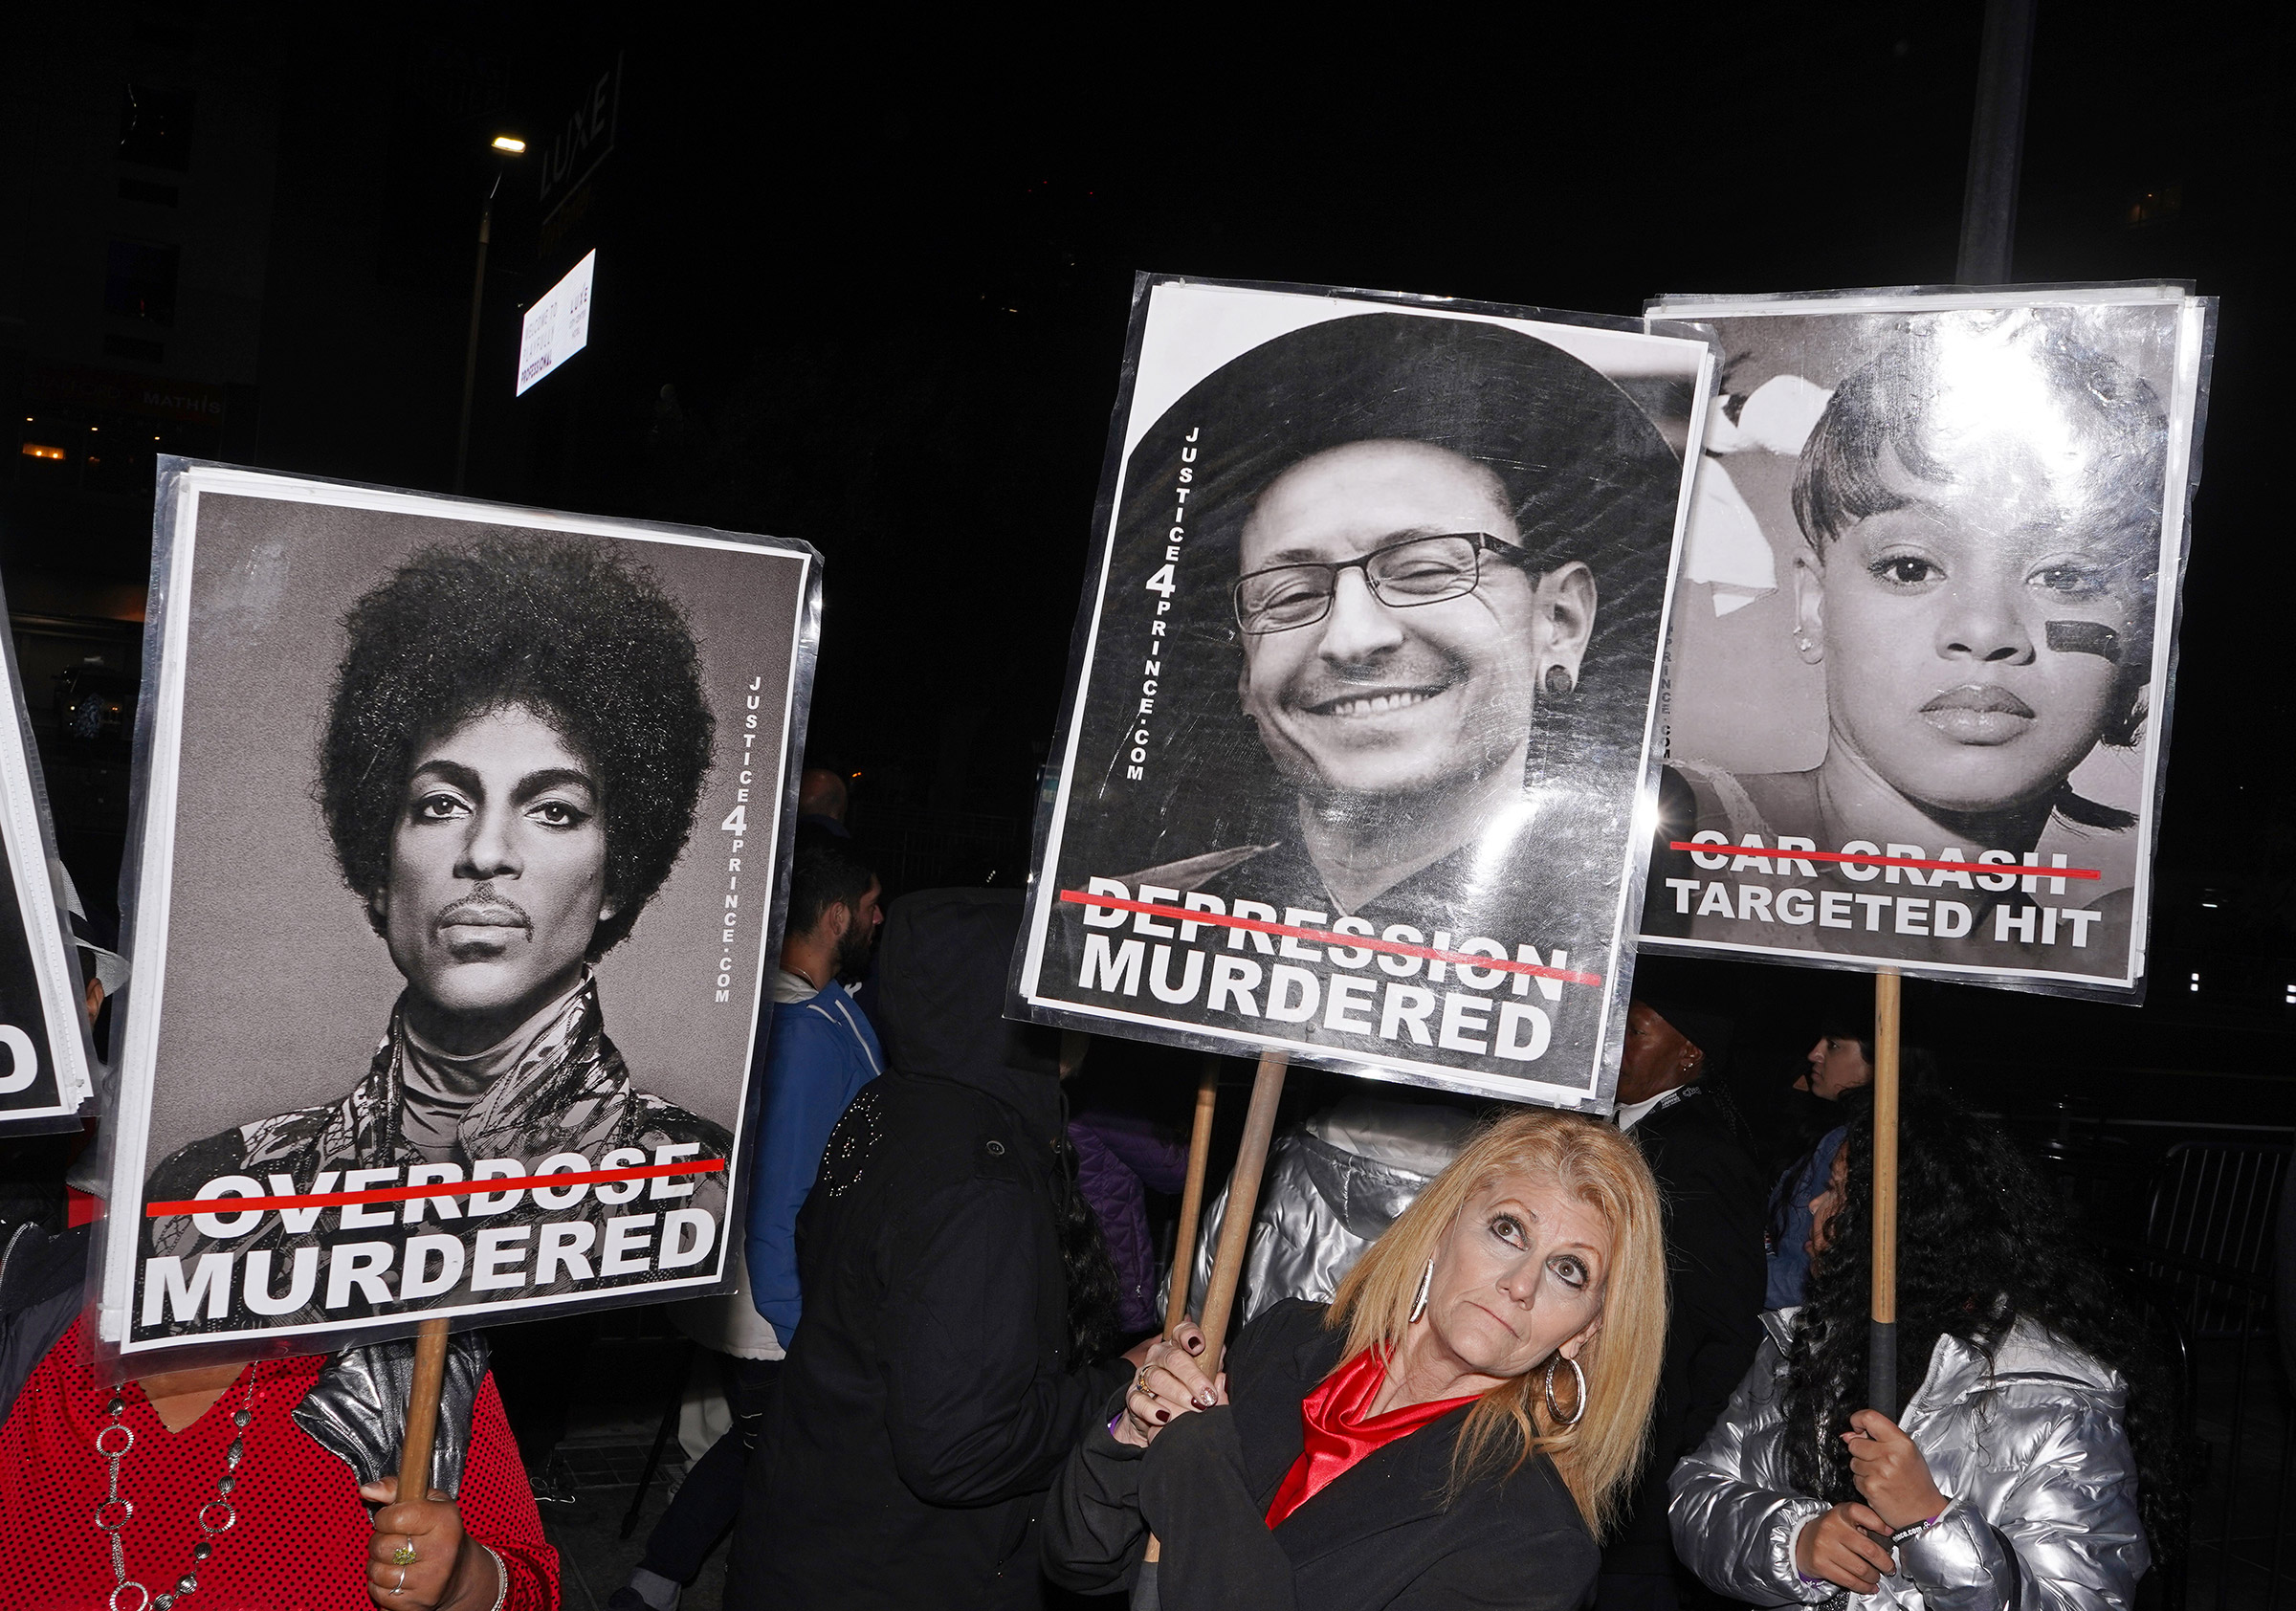 The group Justice 4 Prince protesting outside the Grammy's in Downtown Los Angeles, Jan. 26, 2020. (Jamie Lee Curtis Taete)